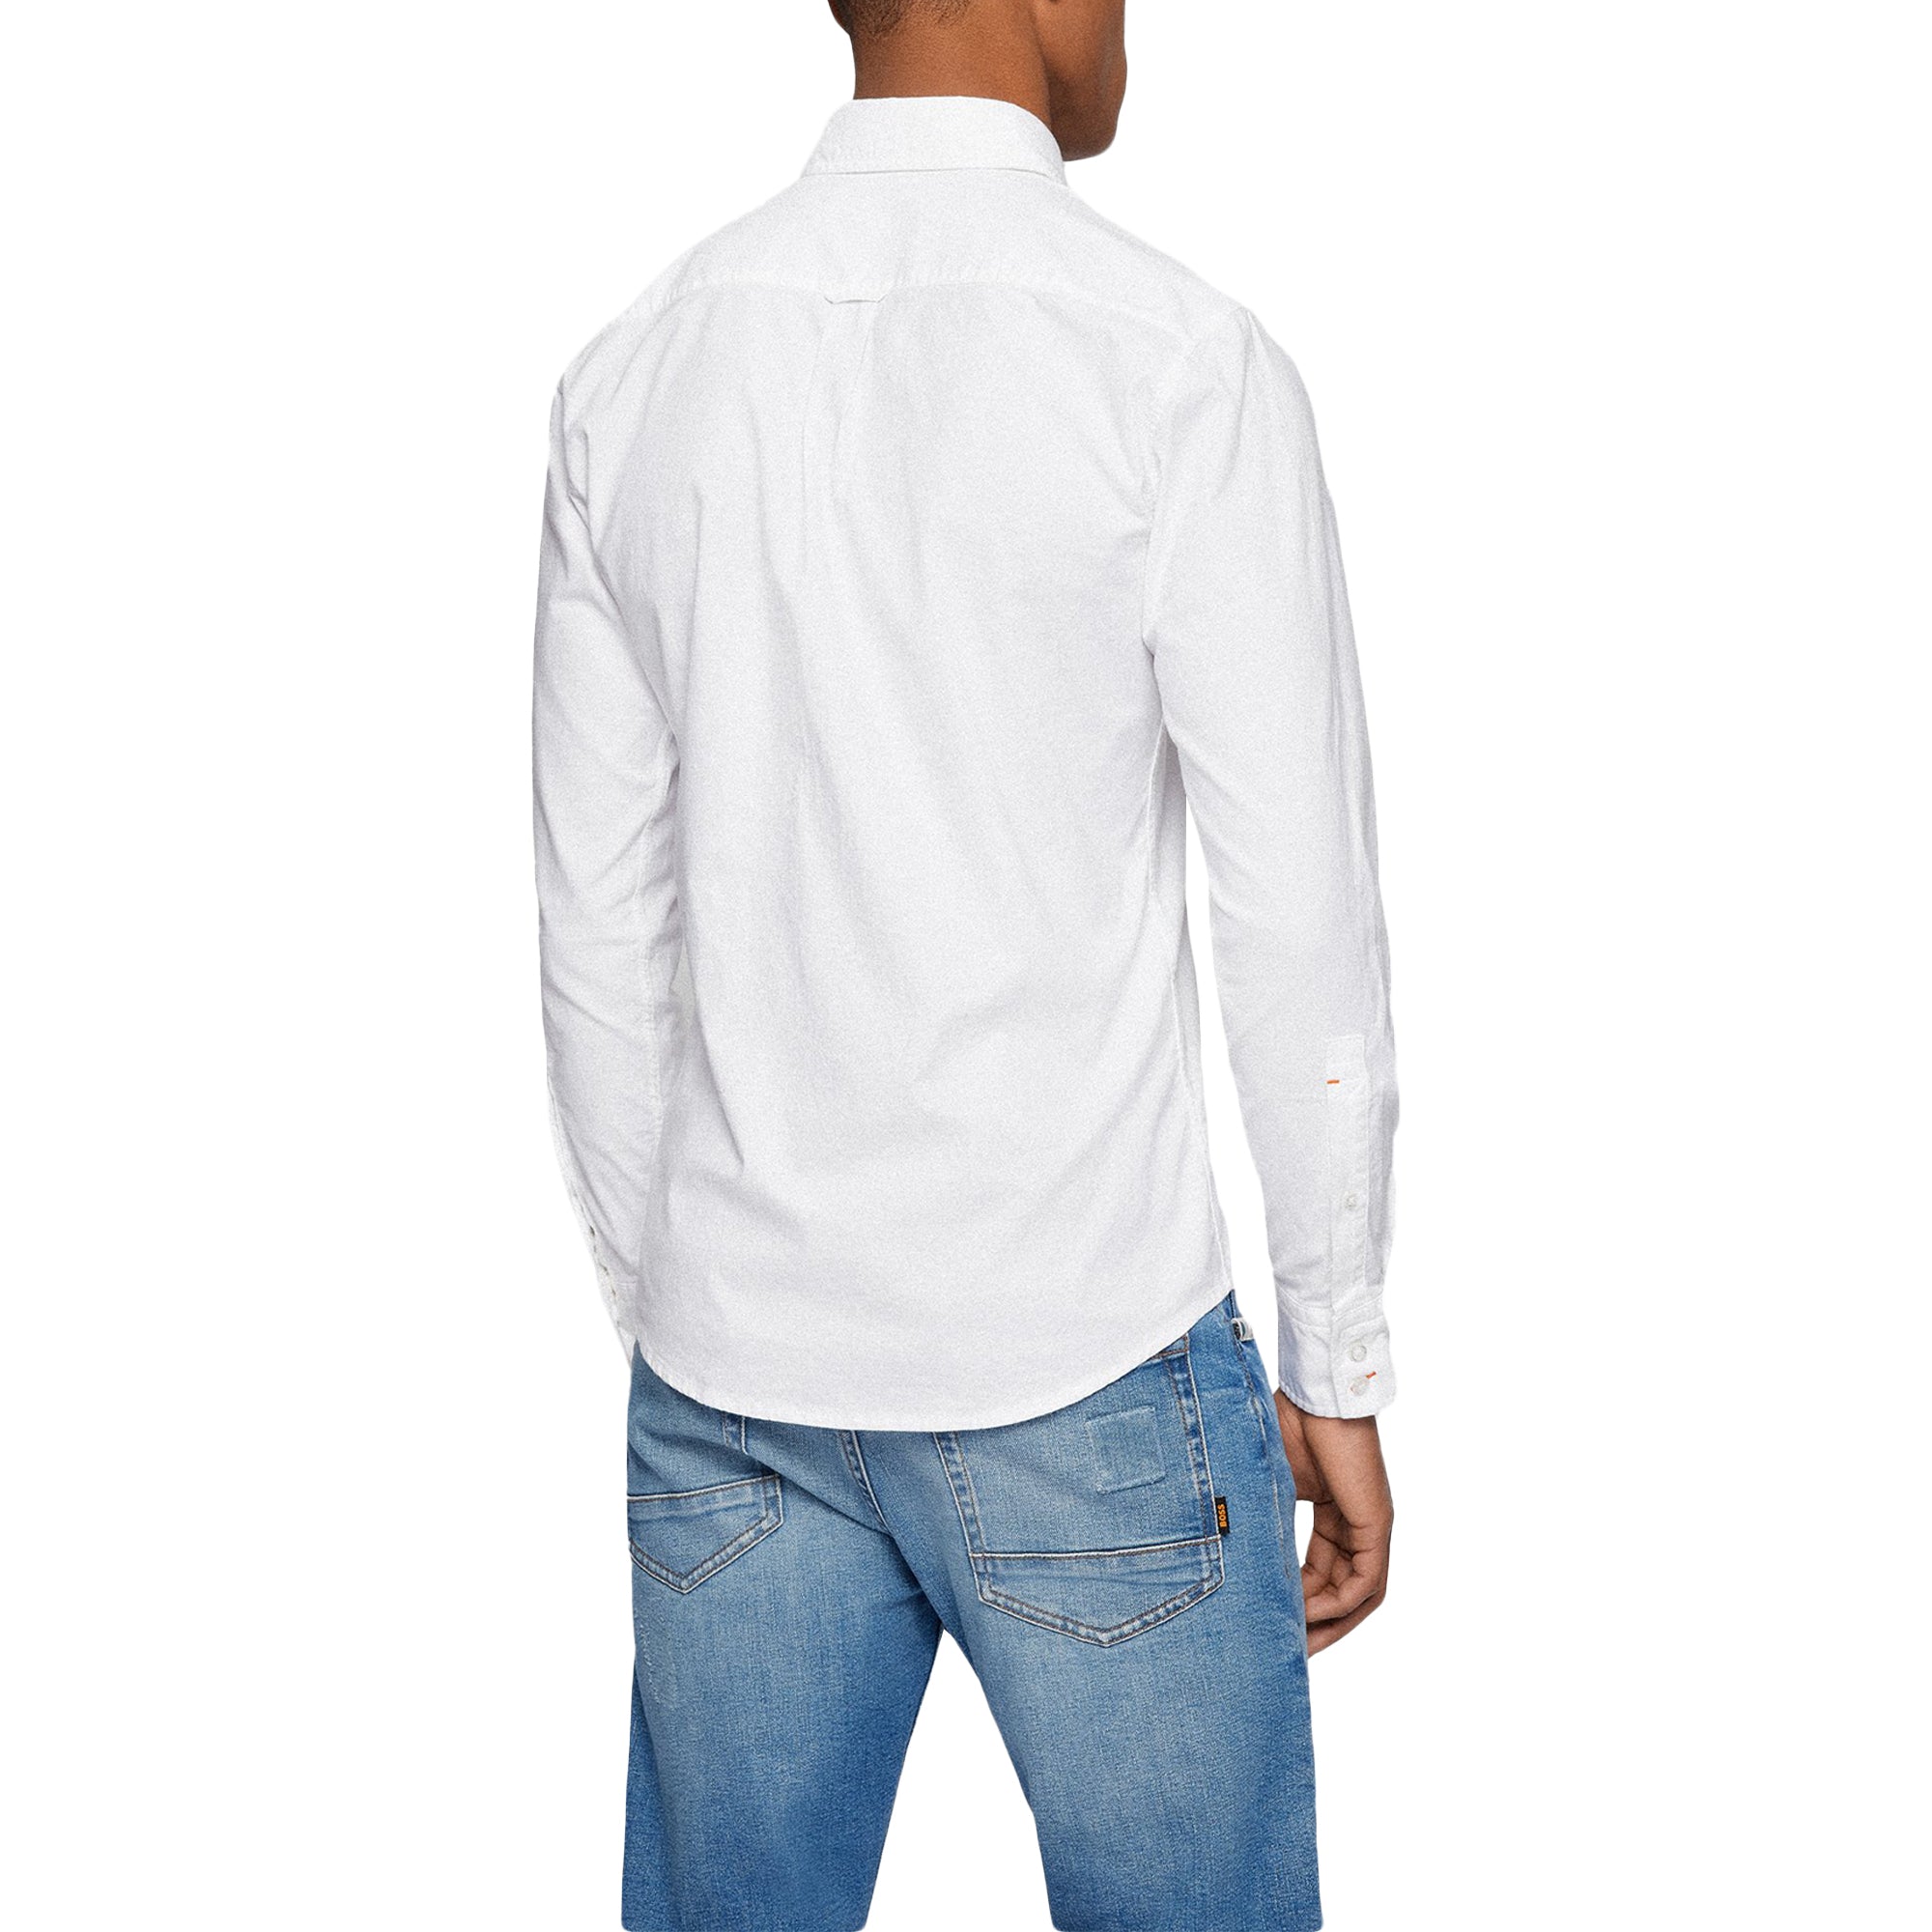 Boss Mabsoot 2 Oxford Slim Fit Shirt - White